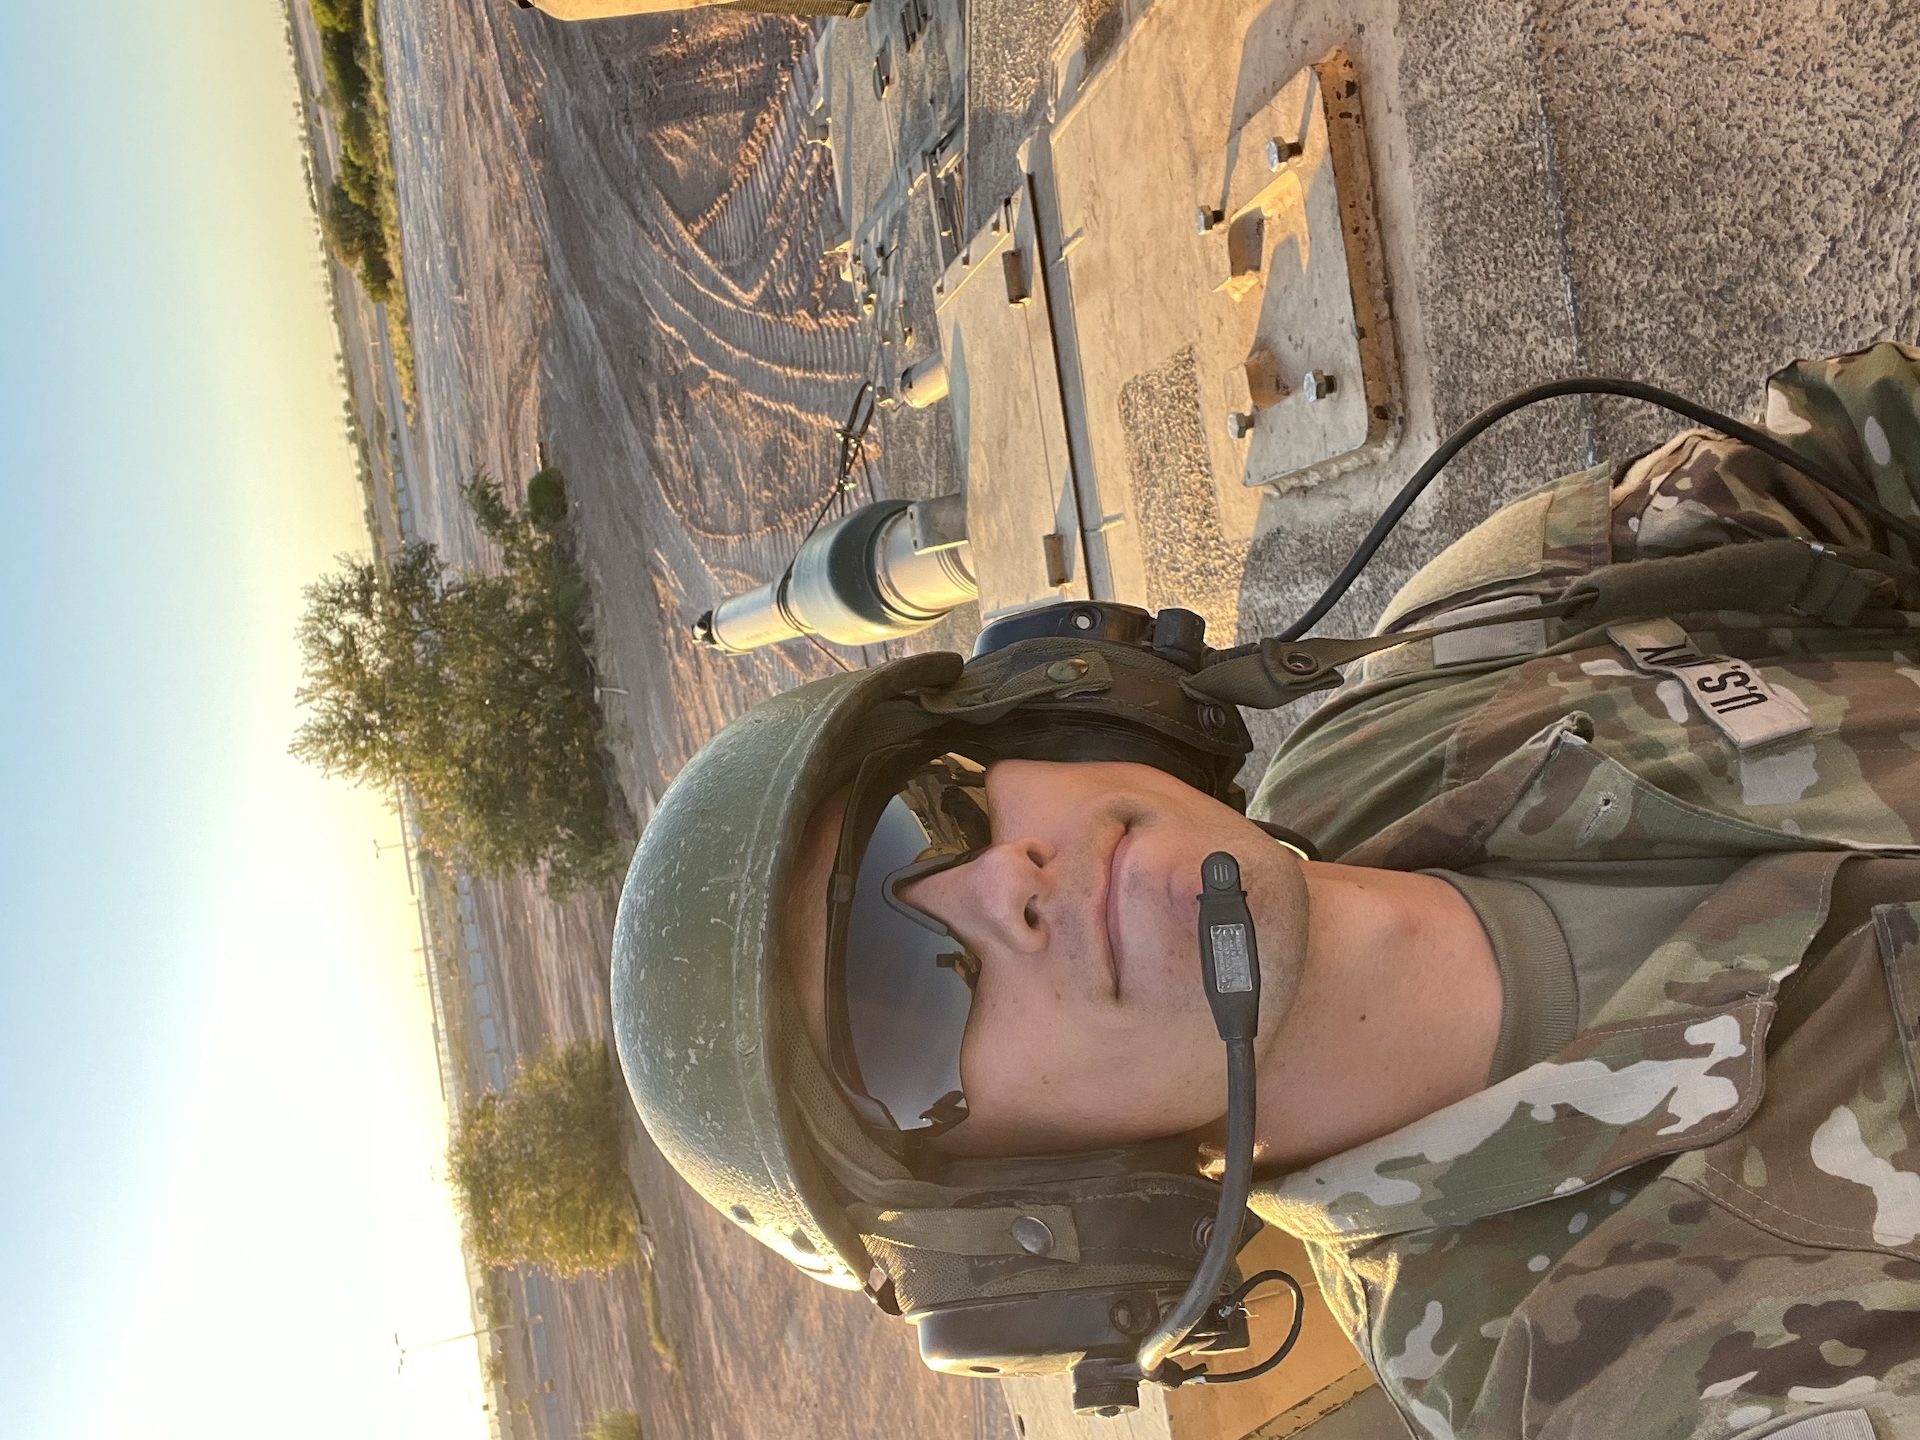 Cadet Lurie in Fort Bliss, TX 